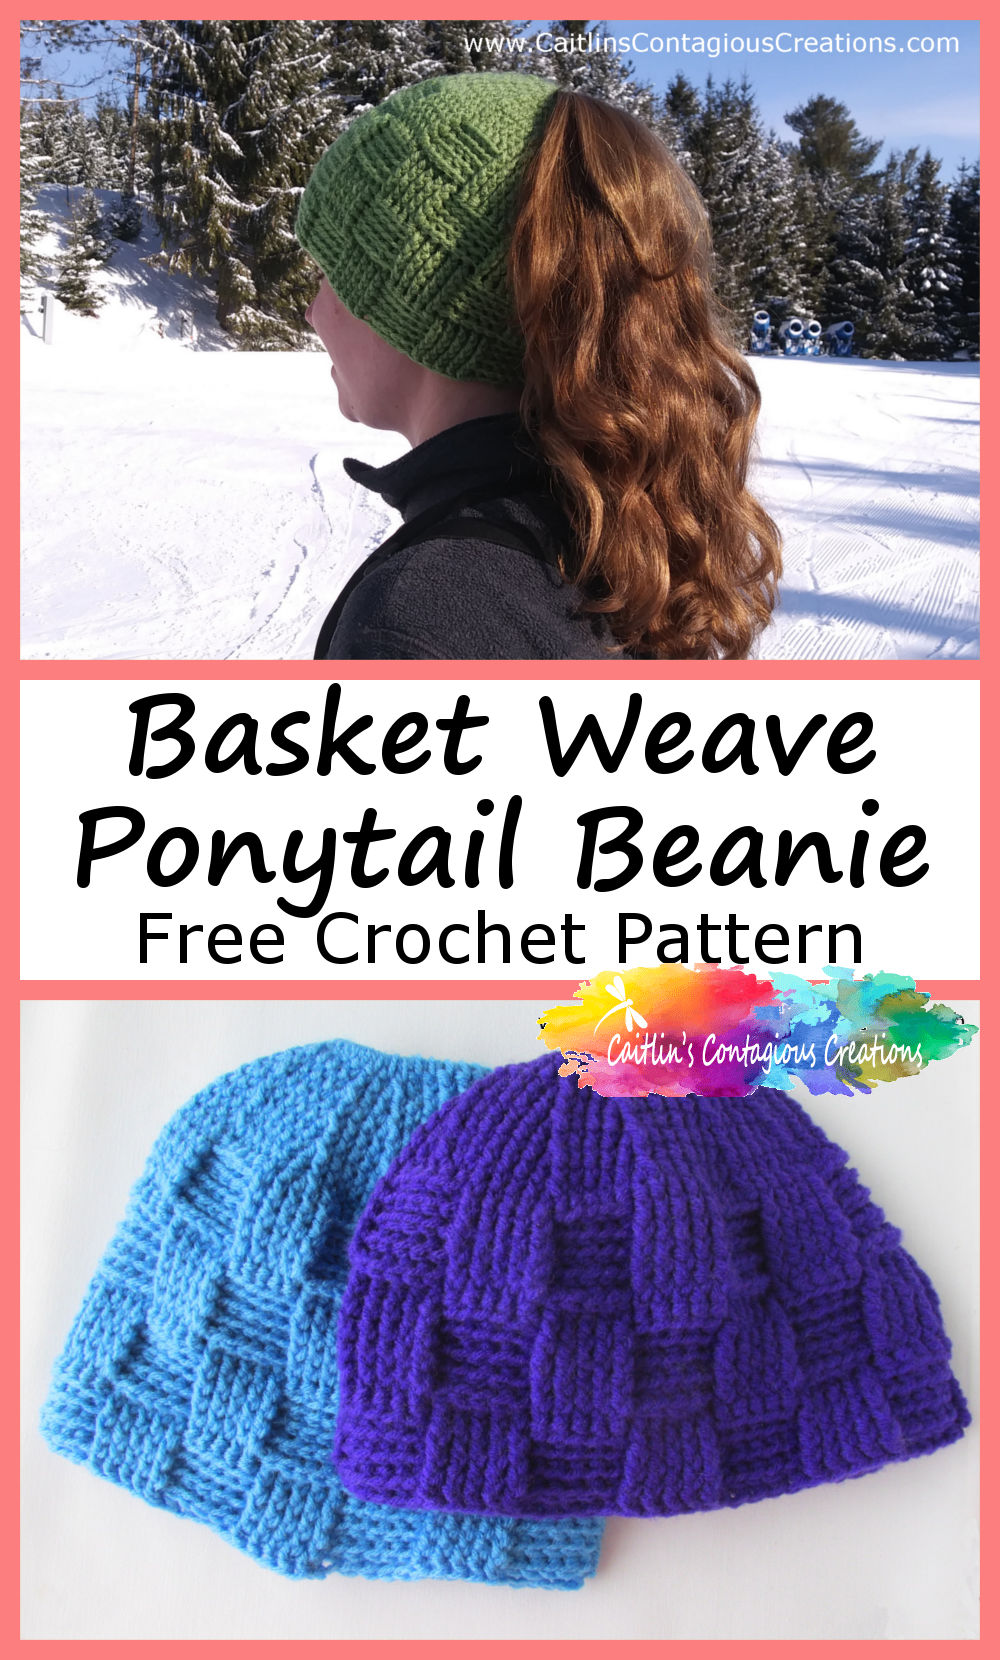 cover photos with hat in use and length options. text overlay "Basket Weave Ponytail Beanie Free Crochet Pattern"